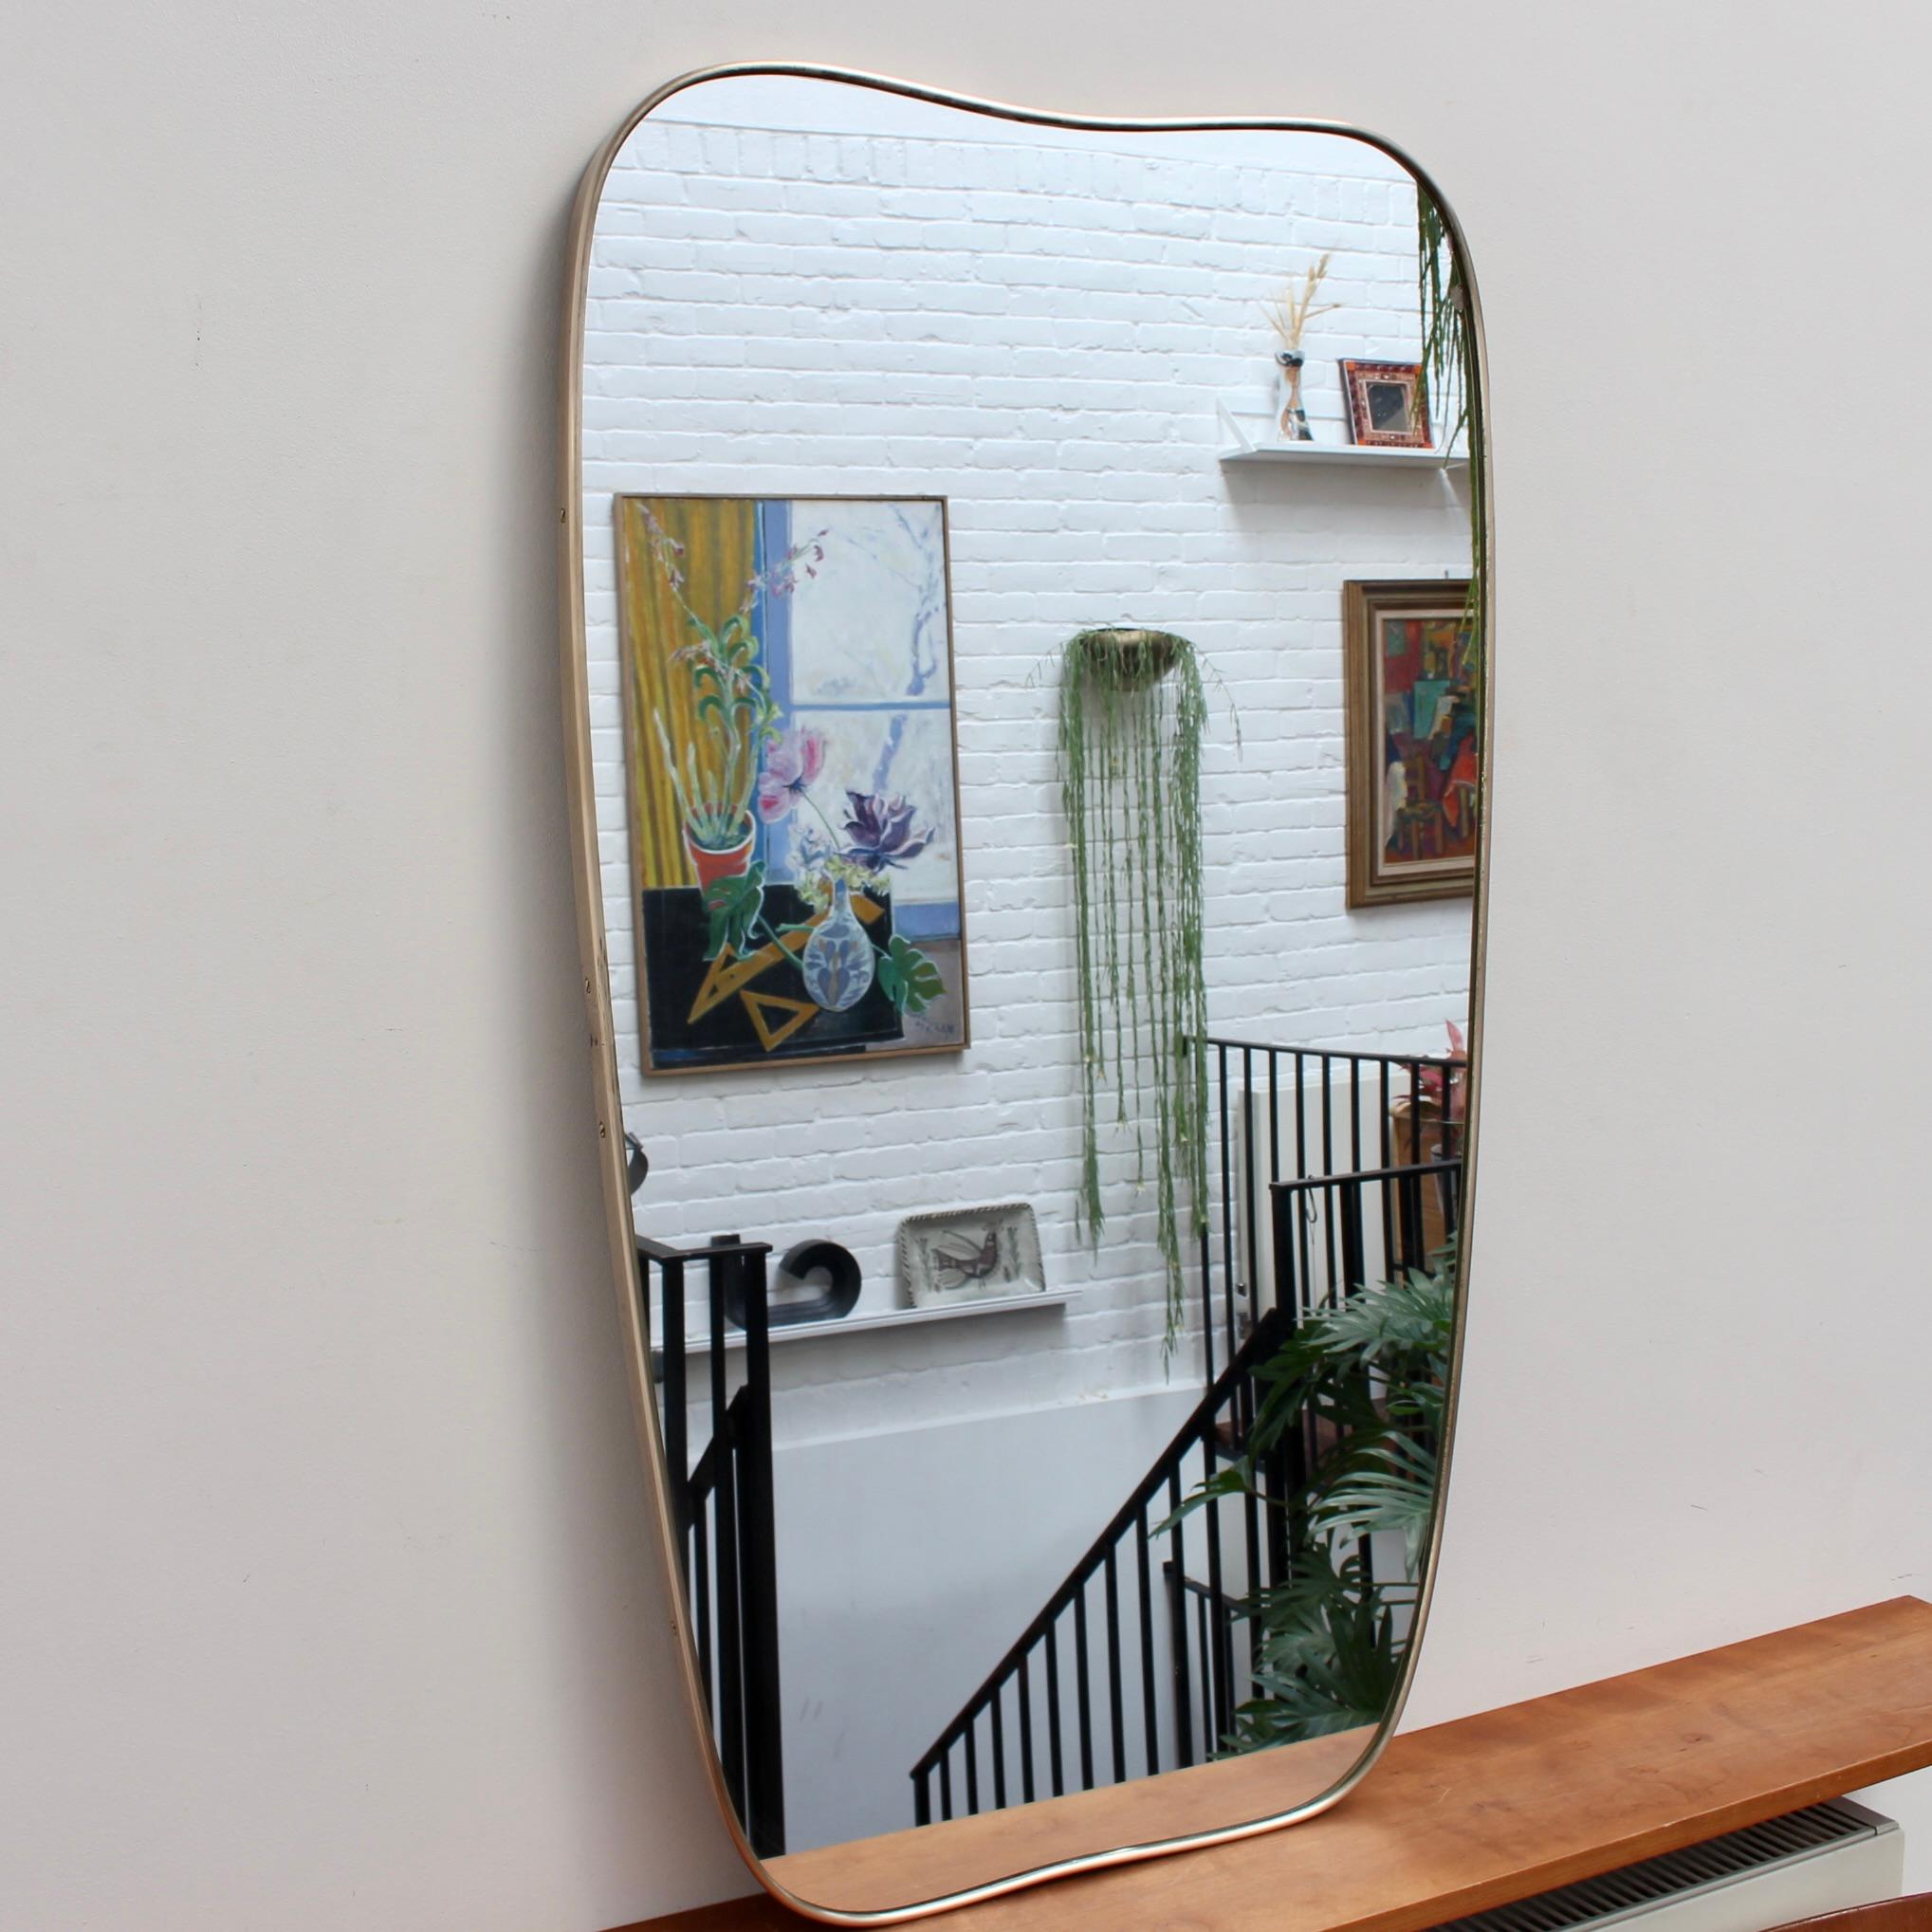 Large Mid-Century Italian wall mirror with brass frame (circa 1950s). The mirror is classically-shaped and distinctive in a Gio Ponti style. This mirror is in good overall condition notwithstanding the chip and blemish evident in the glass (please